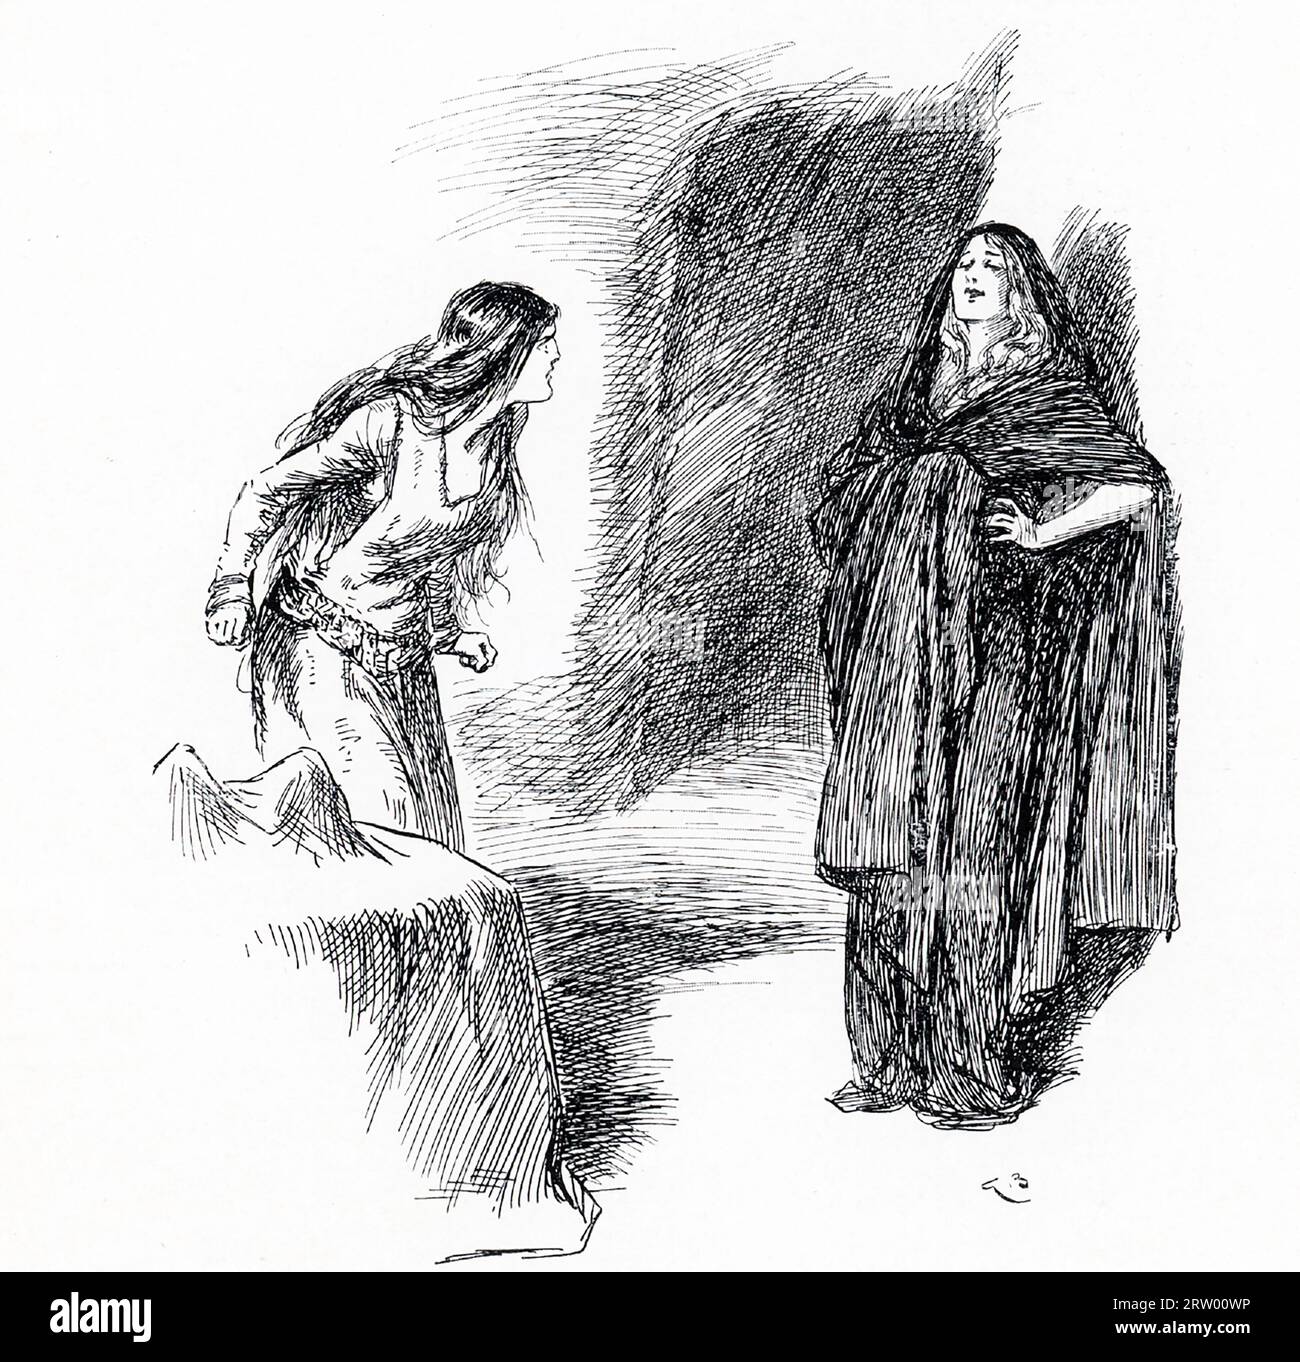 The early 1900s caption reads: 'Gudrun rose and came towards Brynhild.' In Norse mythology, Gudrun was the wife of the great hero Sigurd. n the Scandinavian ‘Volsunga Saga’, and the Icelandic ‘Poetic (or Younger) Edda’ and ‘Prose (or Elder) Edda’. The hero Sigurd came to King Giuki’s court after braving the wall of flames surrounding the warrior-maiden Brynhild, with whom he fell in love. In the course of an argument between Gudrun and Brynhild, Brynhild realized she had been wedded to Gunnar by deception, and in her rage sought Sigurd’s death. Stock Photo